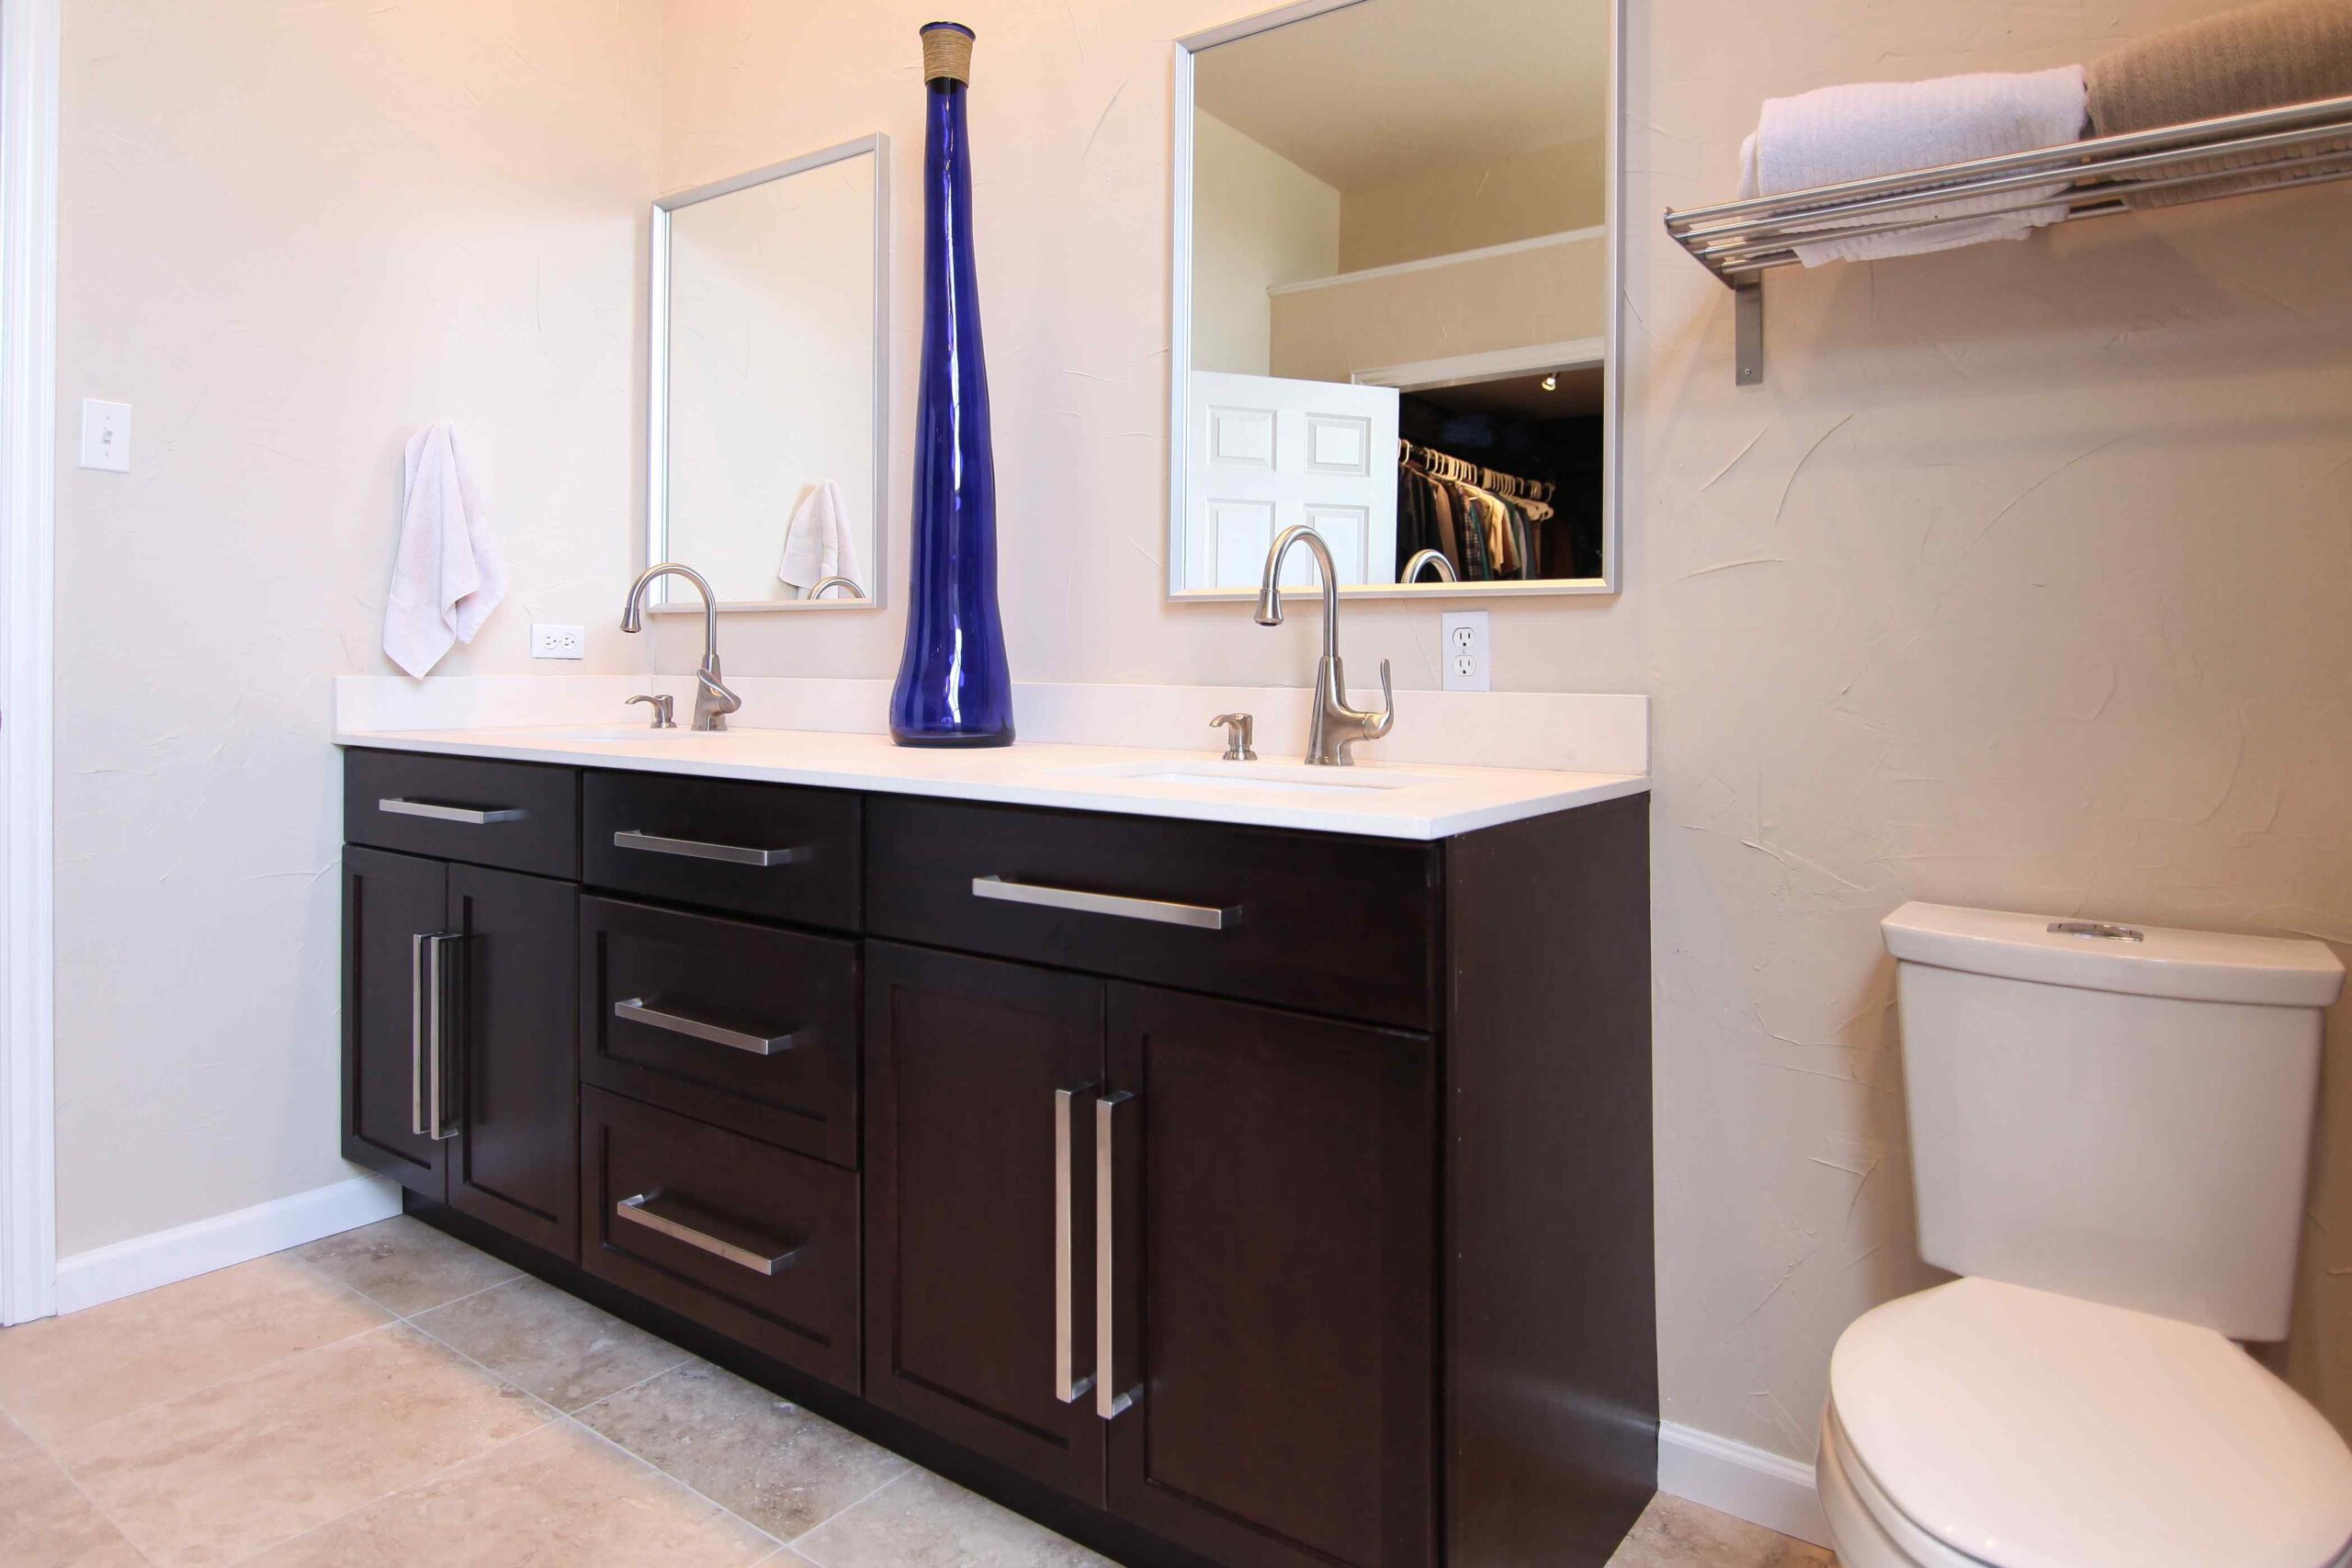 Modern Blu bathrooms mahogany cabinets - Also offers Basement Renovation in Flower Mound TX